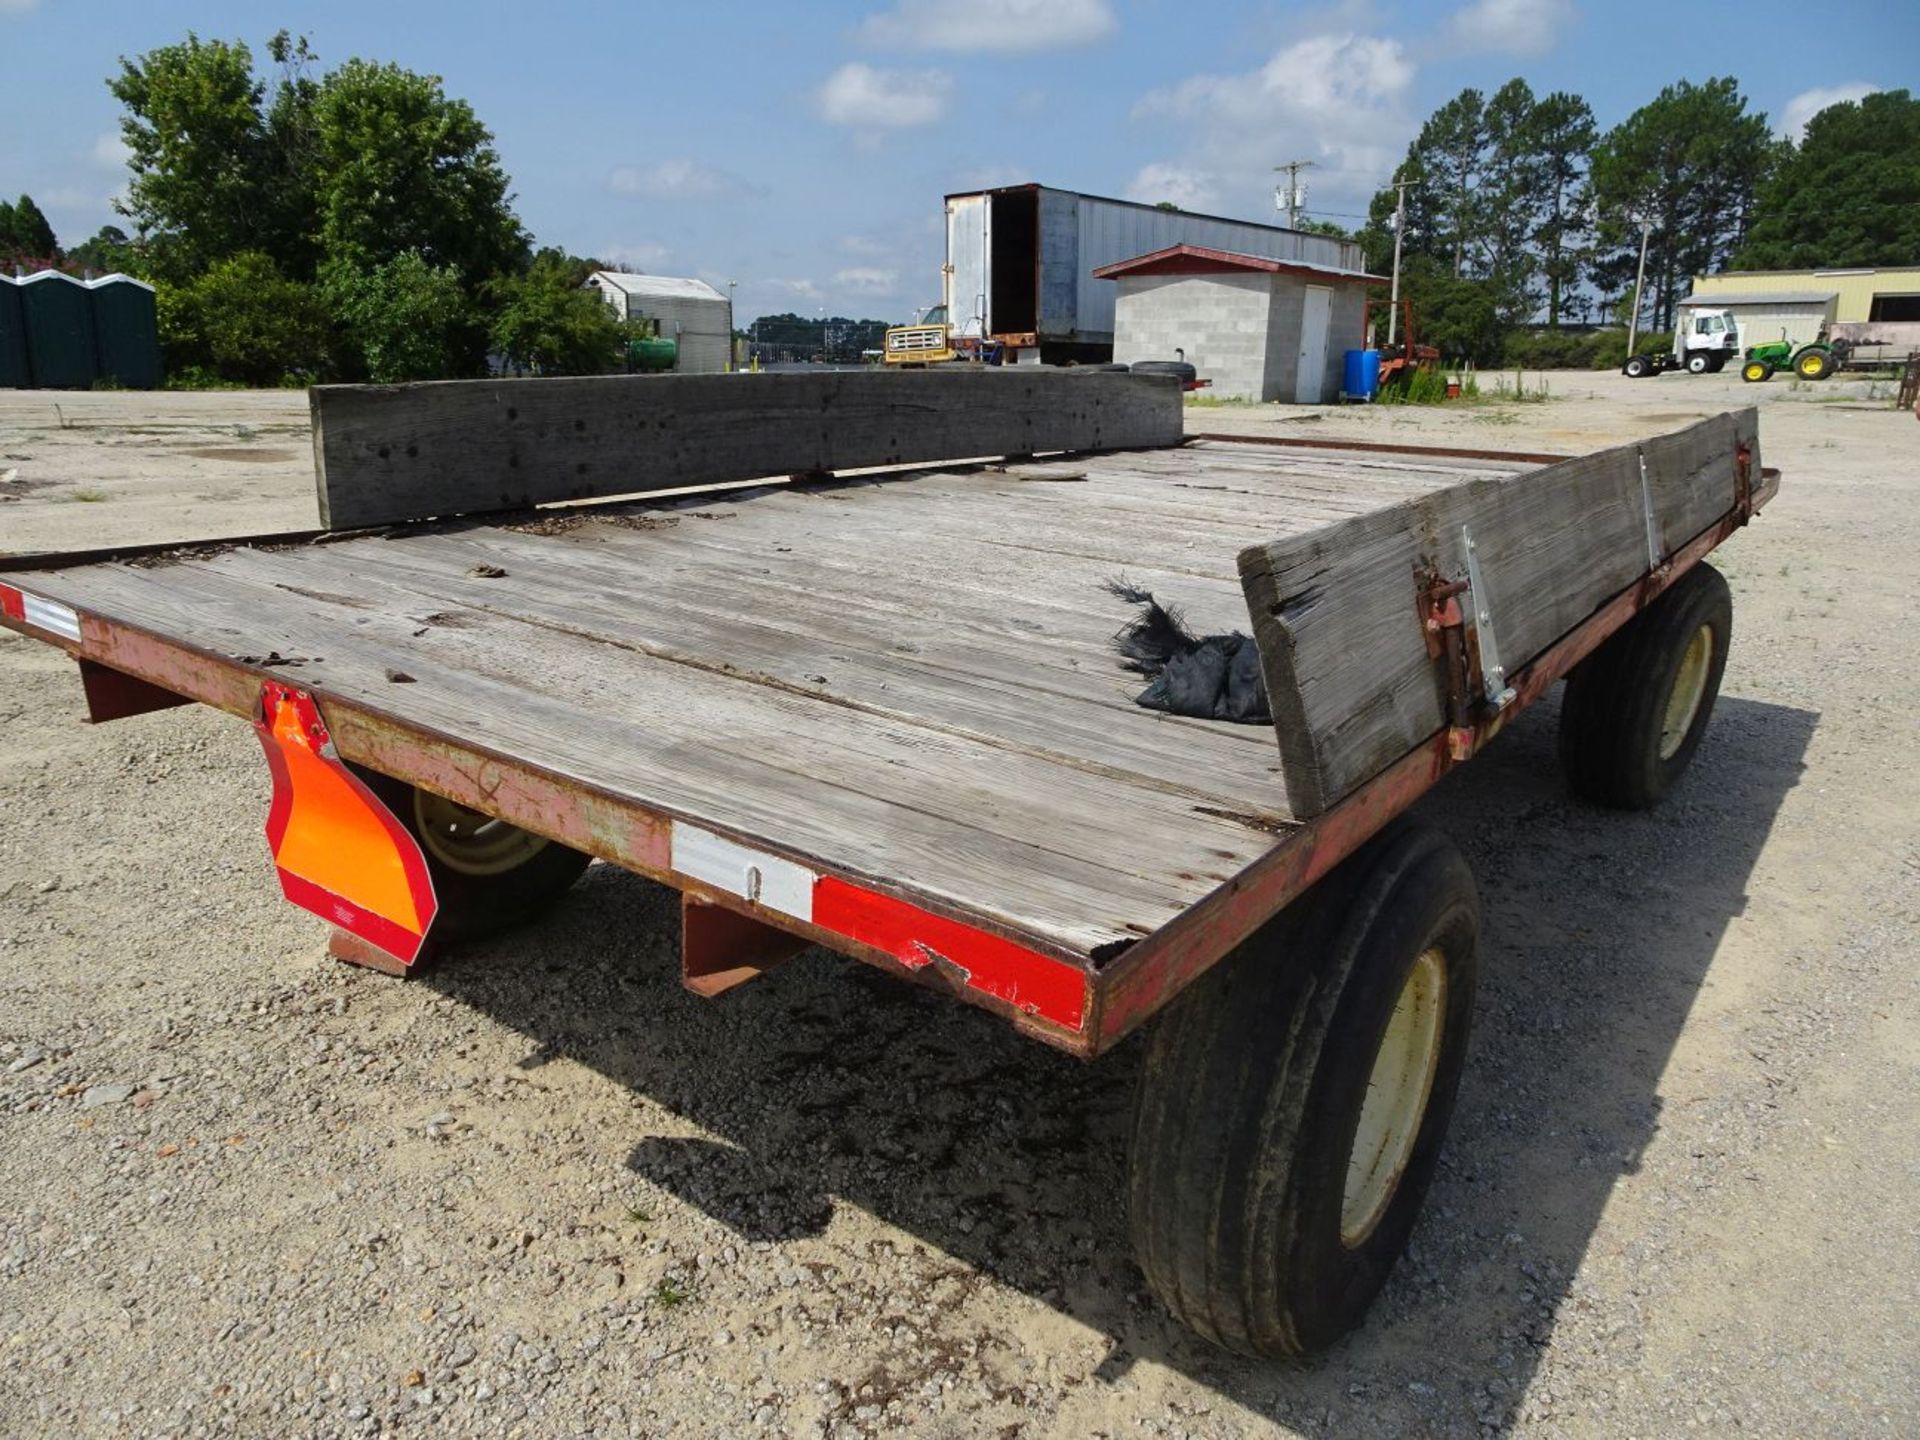 KORY 6872 STEERABLE WAGON, 15' BED, 11L-15 TIRES, WITH HINGED WOOD SIDES (LOCATION: FARM C) - Image 3 of 4